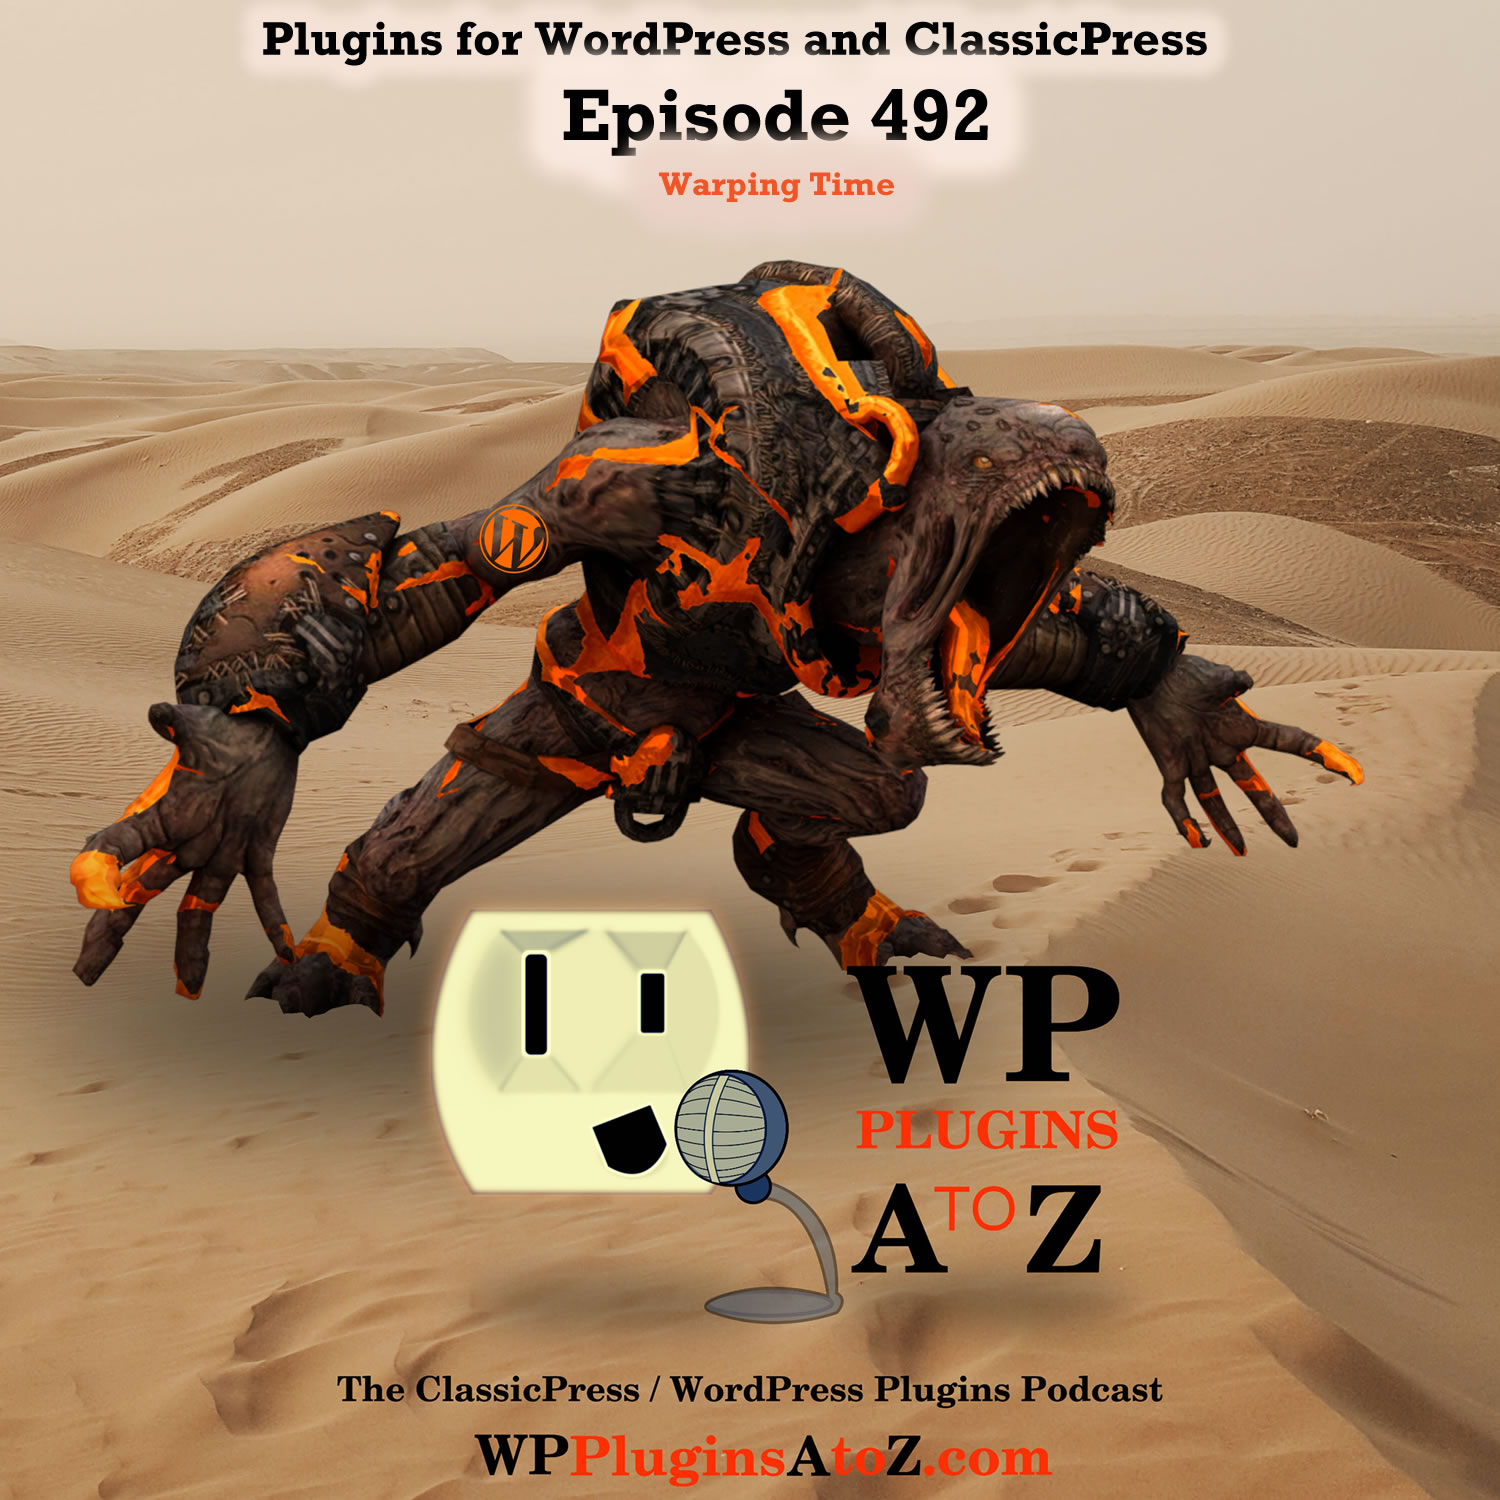 Warping Time It's Episode 492 so grab your Rum and Coke we have plugins for Arts & Crafts,Tracking Time, Stopping Spammers, Time Travelling ..., and ClassicPress Options. It's all coming up on WordPress Plugins A-Z! Papier-mâché, Current Year and Copyright Shortcodes, Years Since, Gravity Forms Email Blacklist and ClassicPress options on Episode 492.